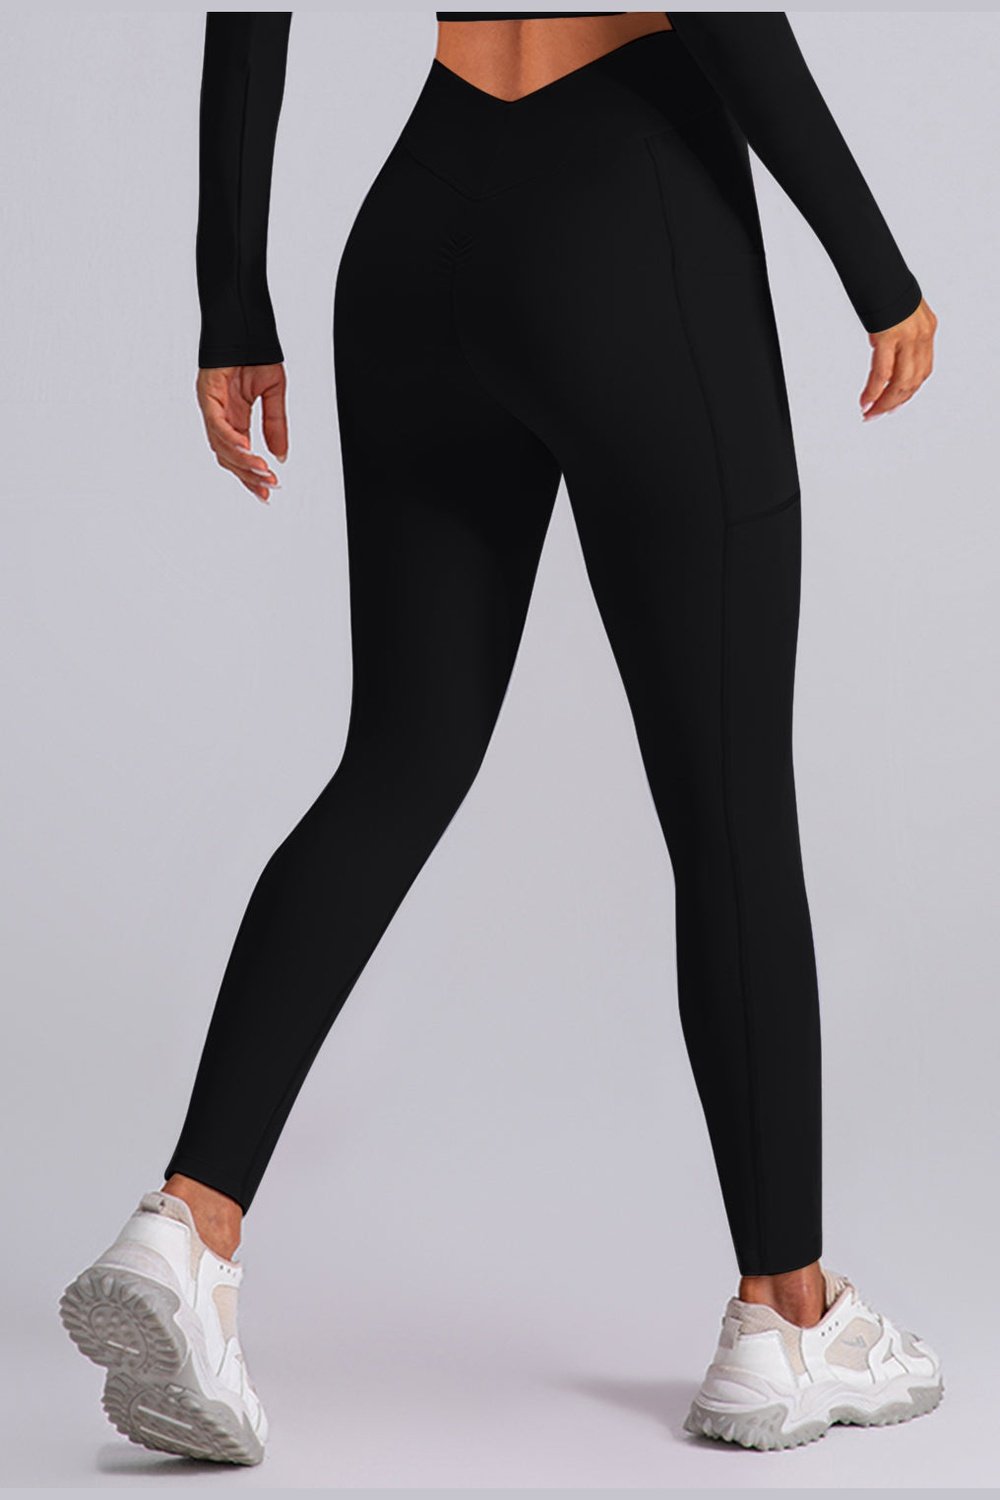 High Waist Active Leggings with Pockets - Leggings - FITGGINS